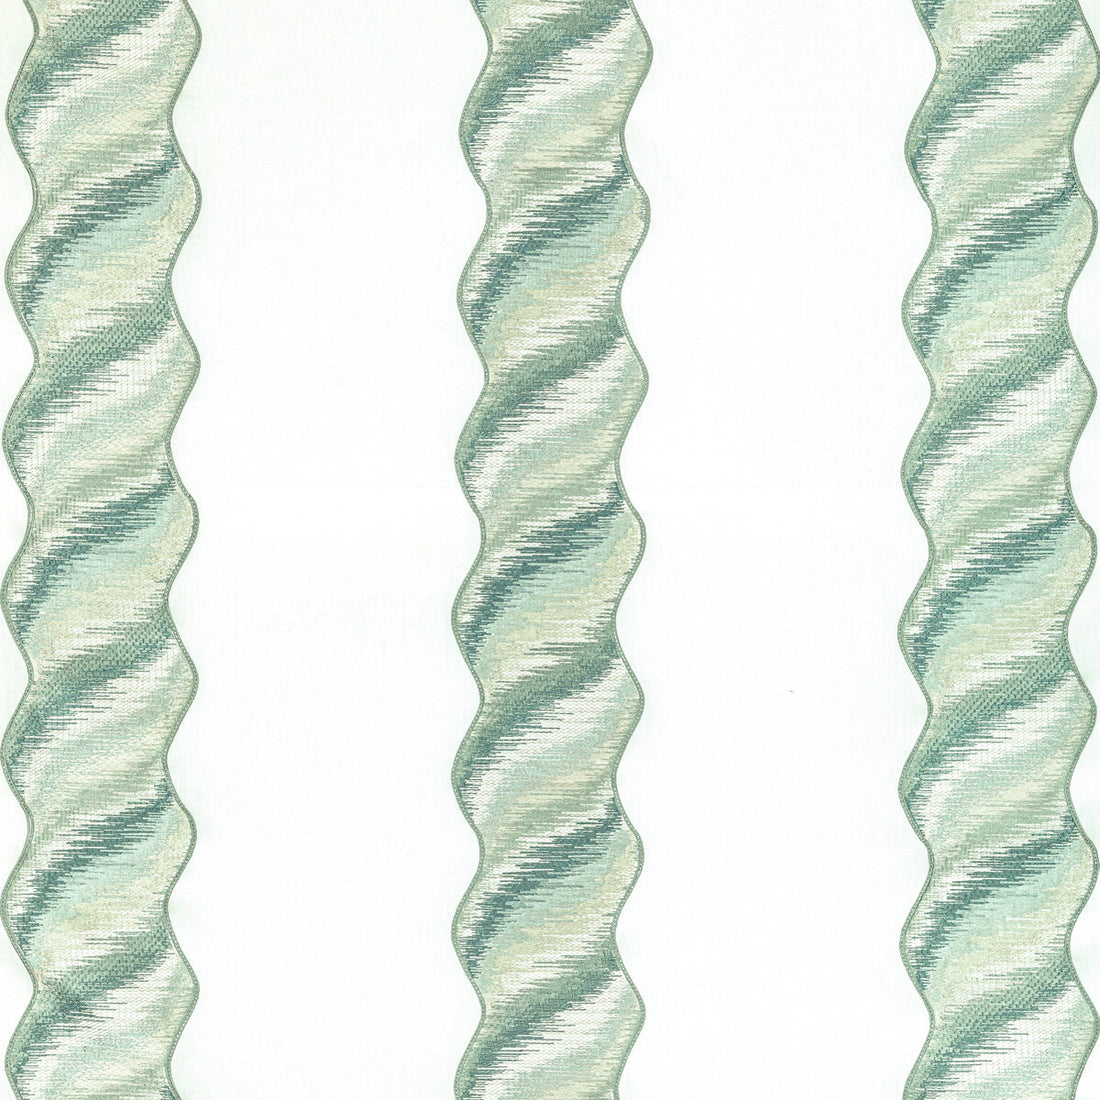 Aqueous fabric in jade color - pattern 4890.3.0 - by Kravet Couture in the Modern Luxe III collection